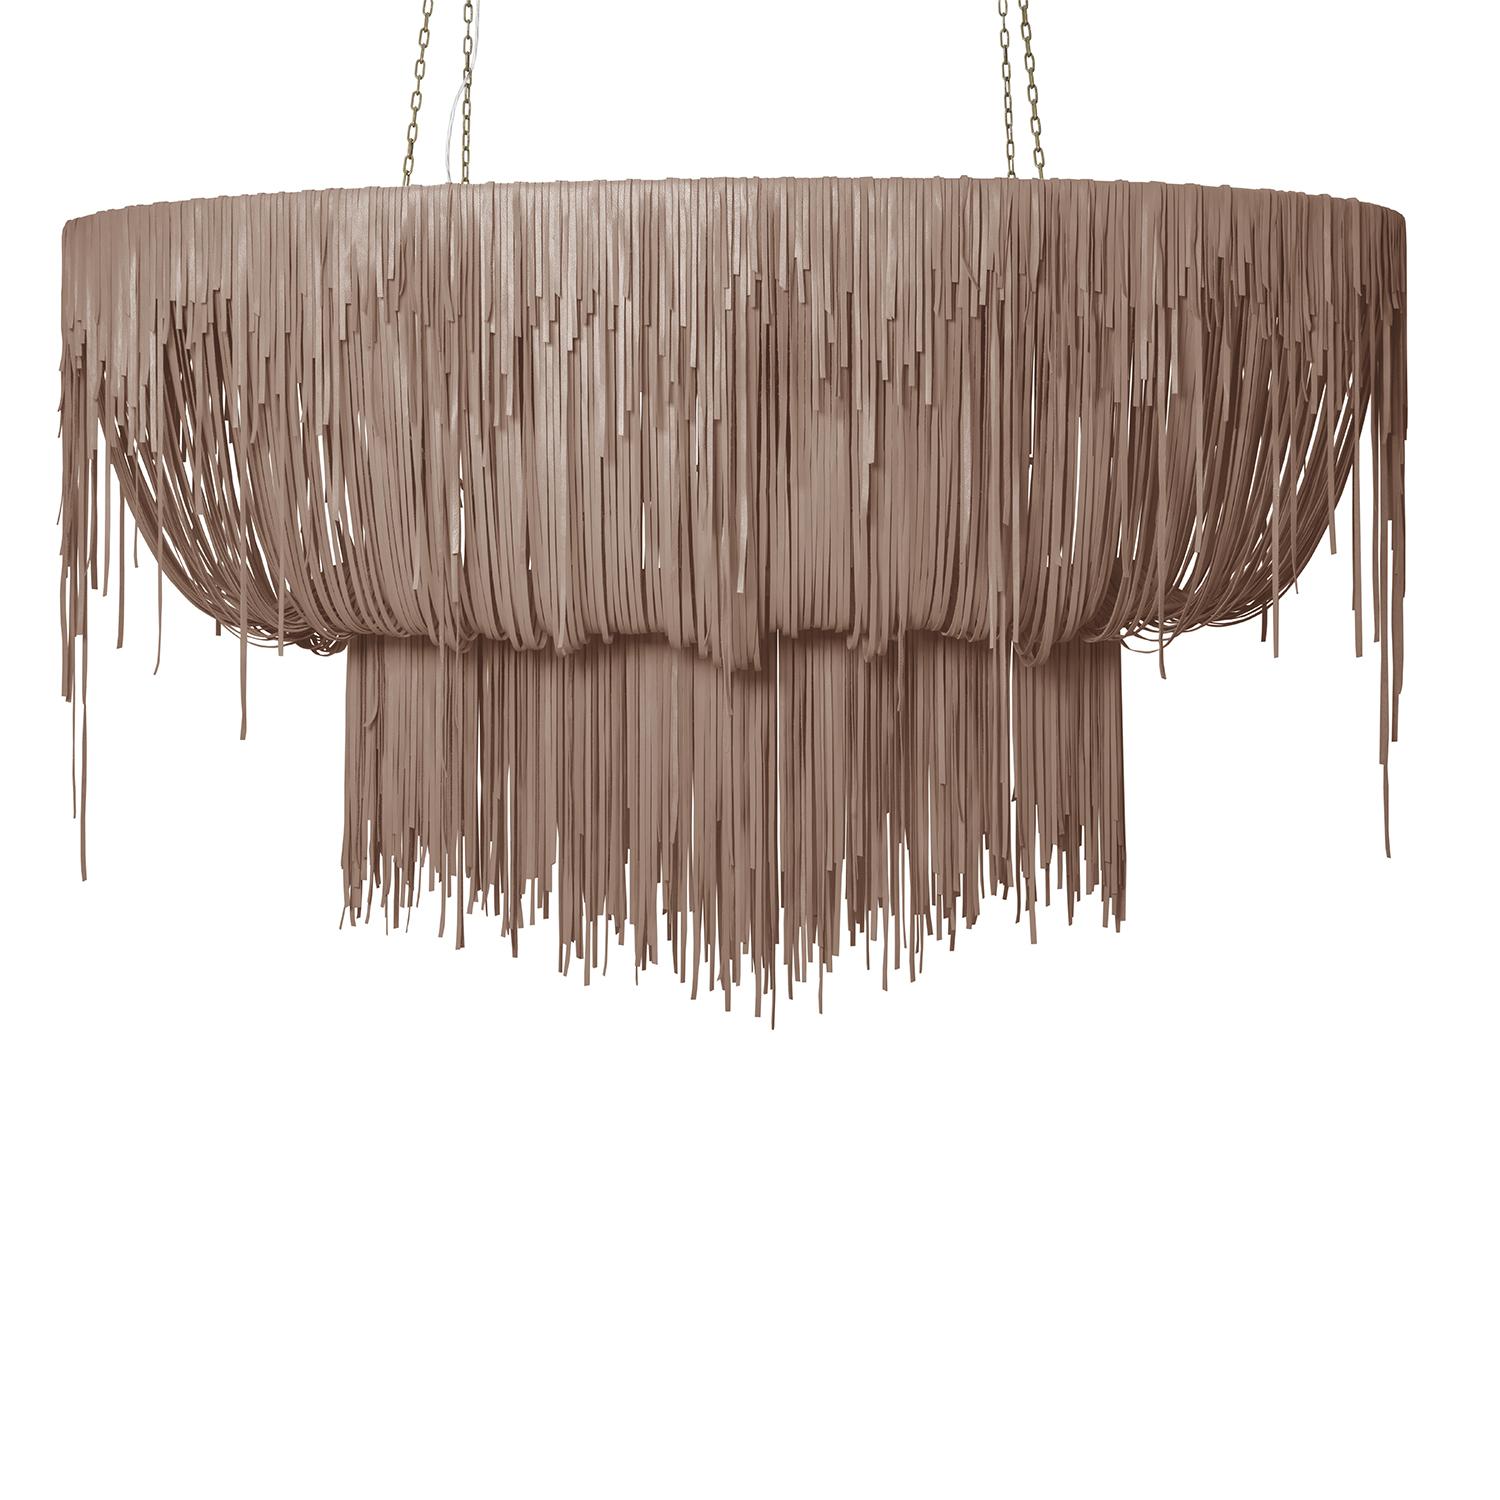 Stretch Oval Urchin Leather Chandelier in Metallic Leather